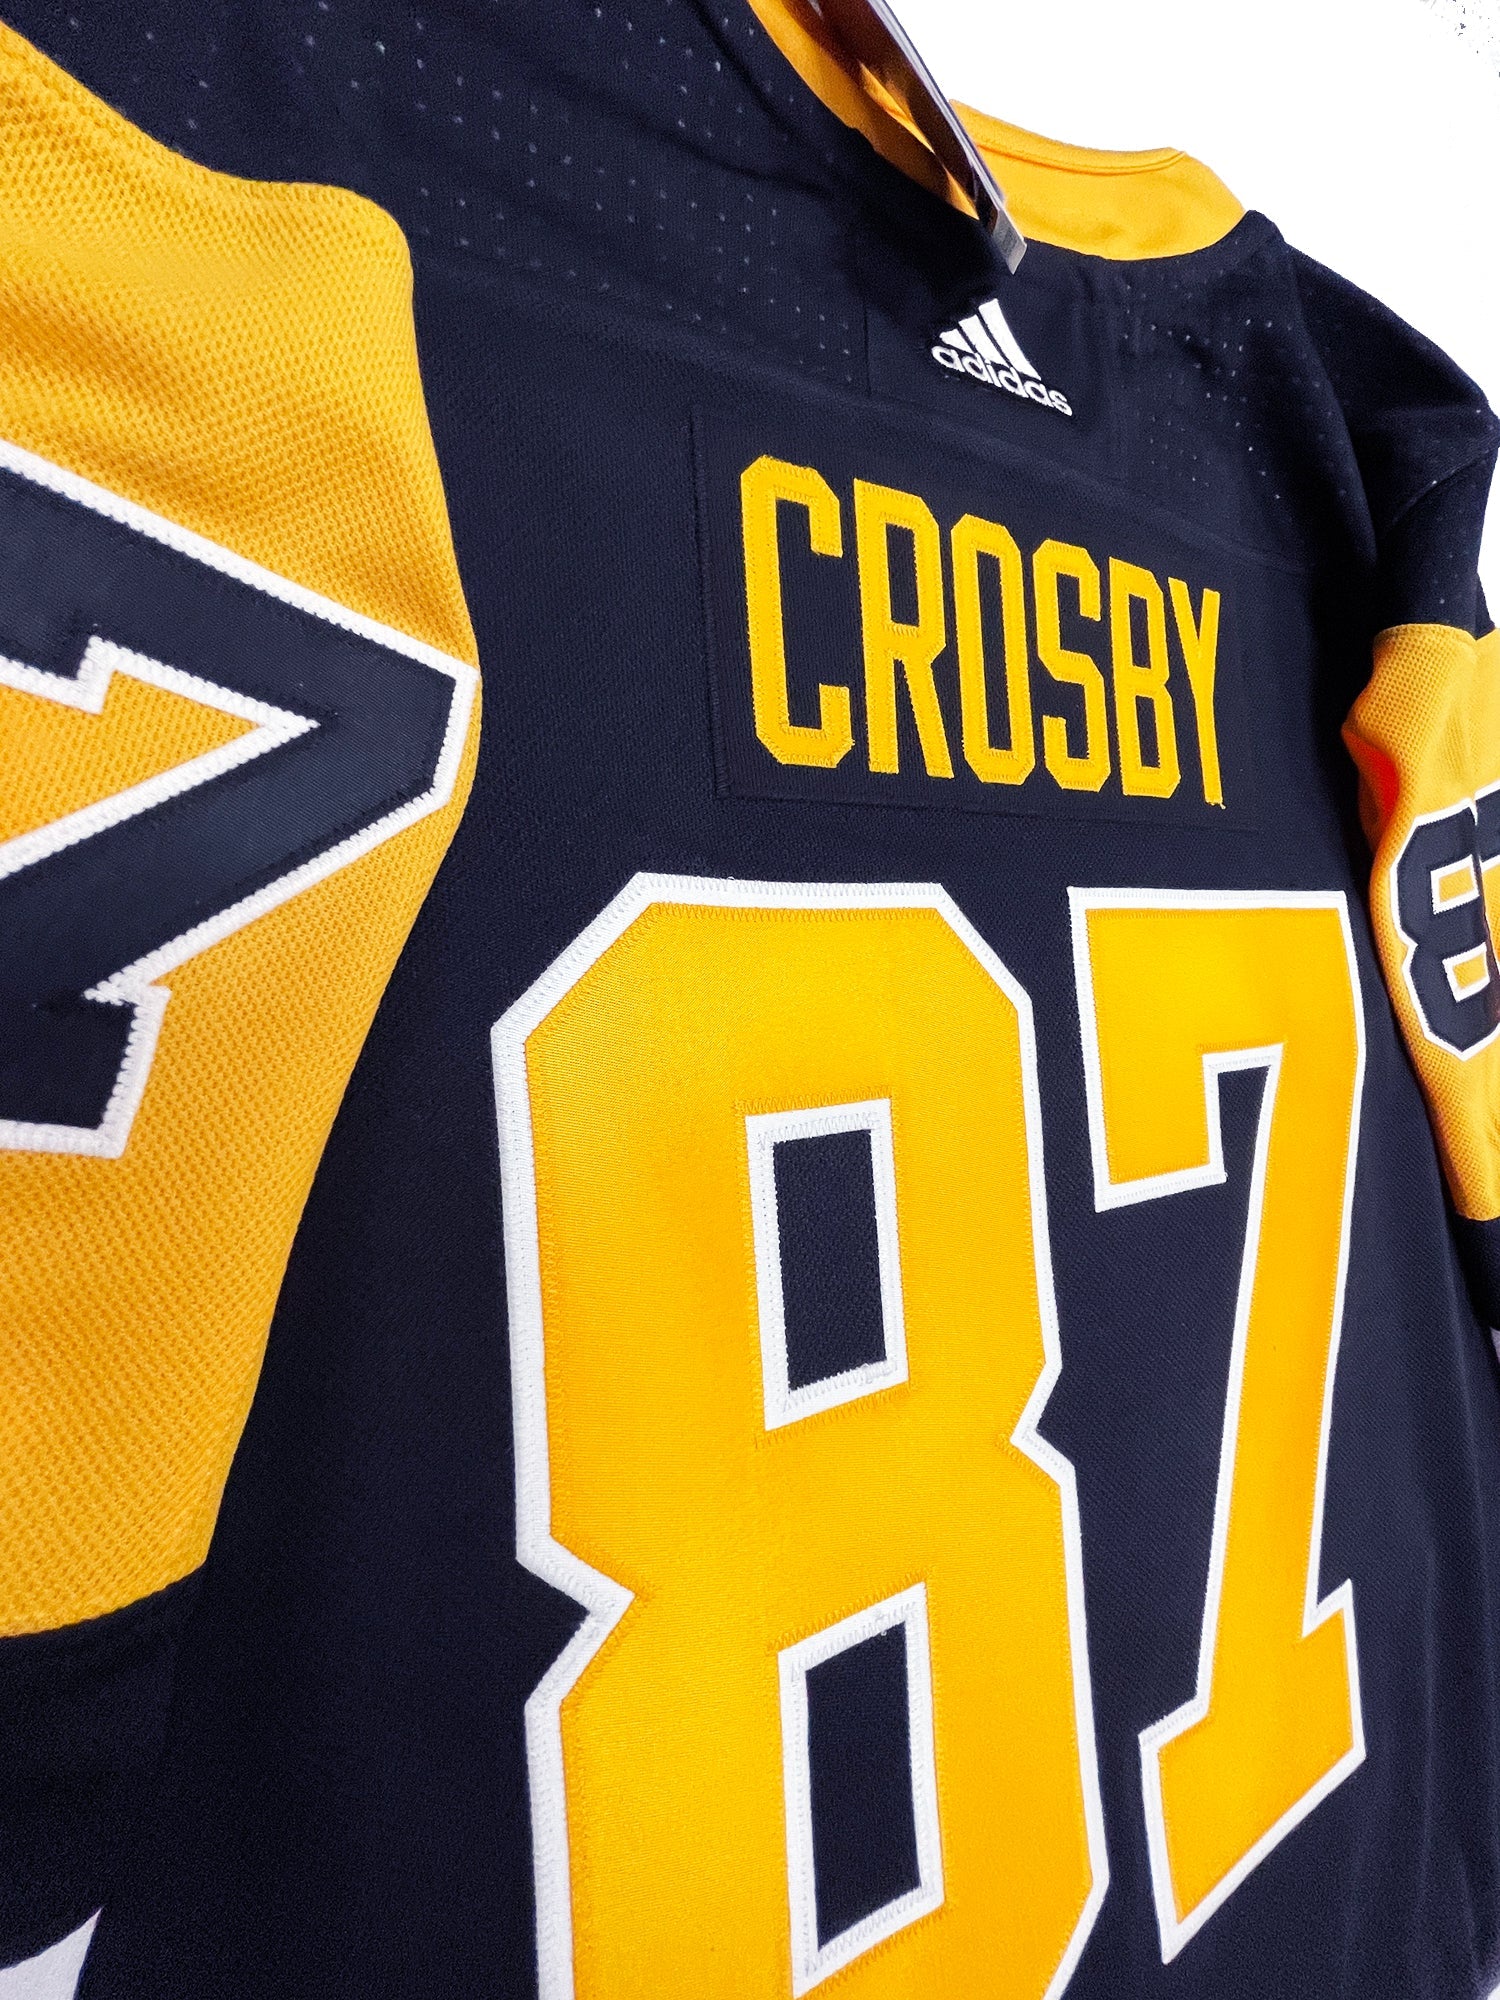 Sidney Crosby Signed authentic Jersey